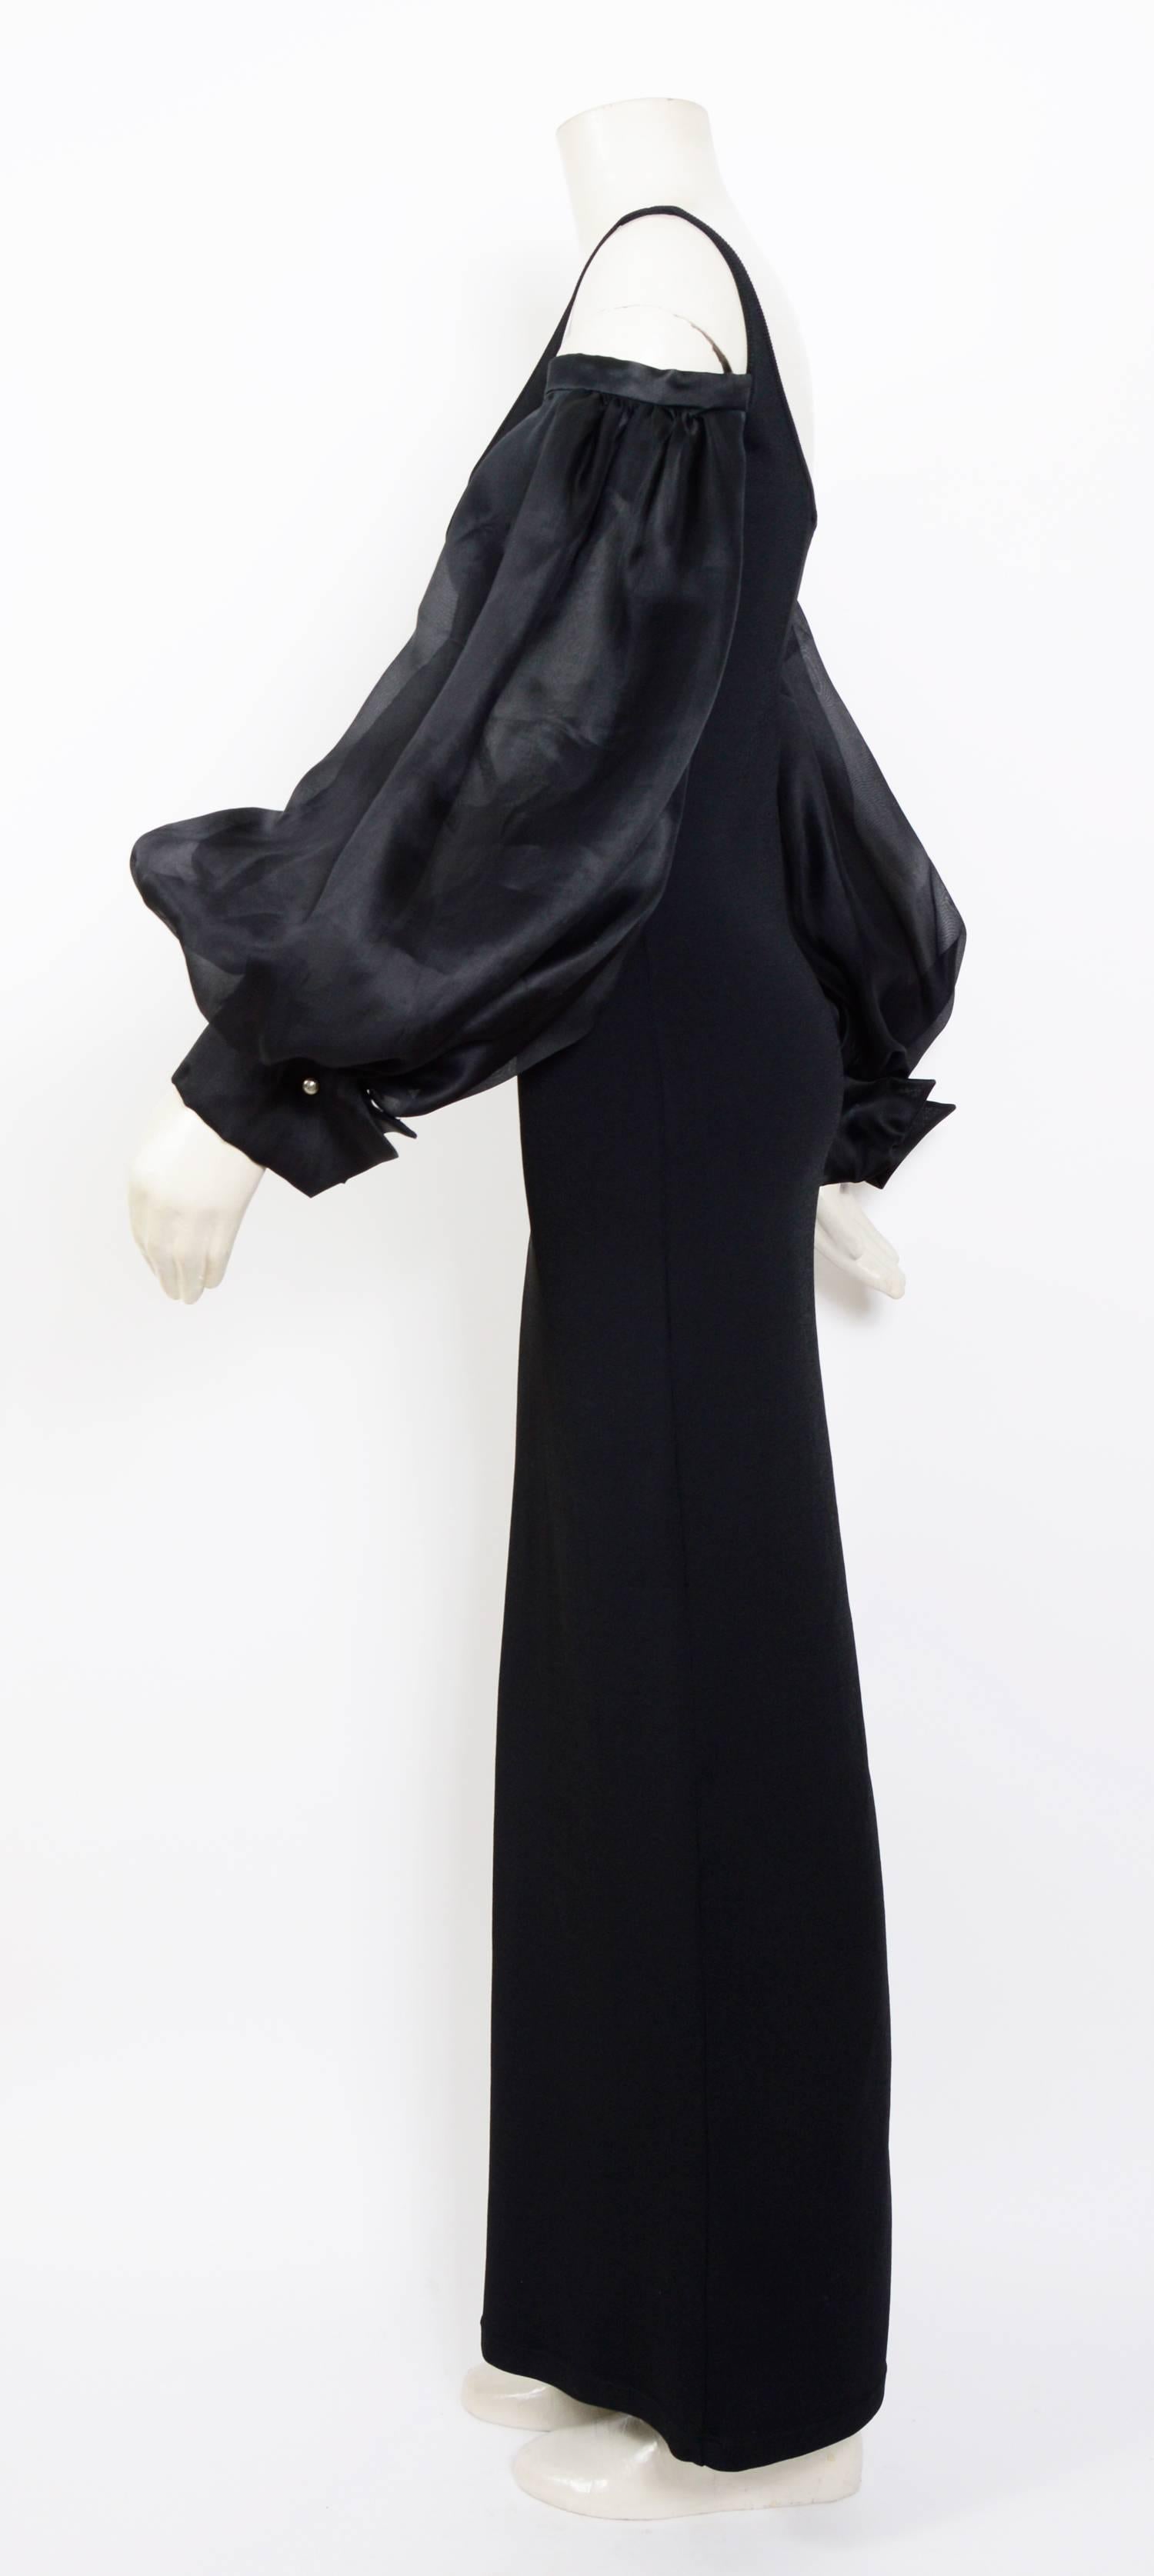 Black Christian Dior by Gianfranco Ferre 1994 black dress and billowing sleeves  